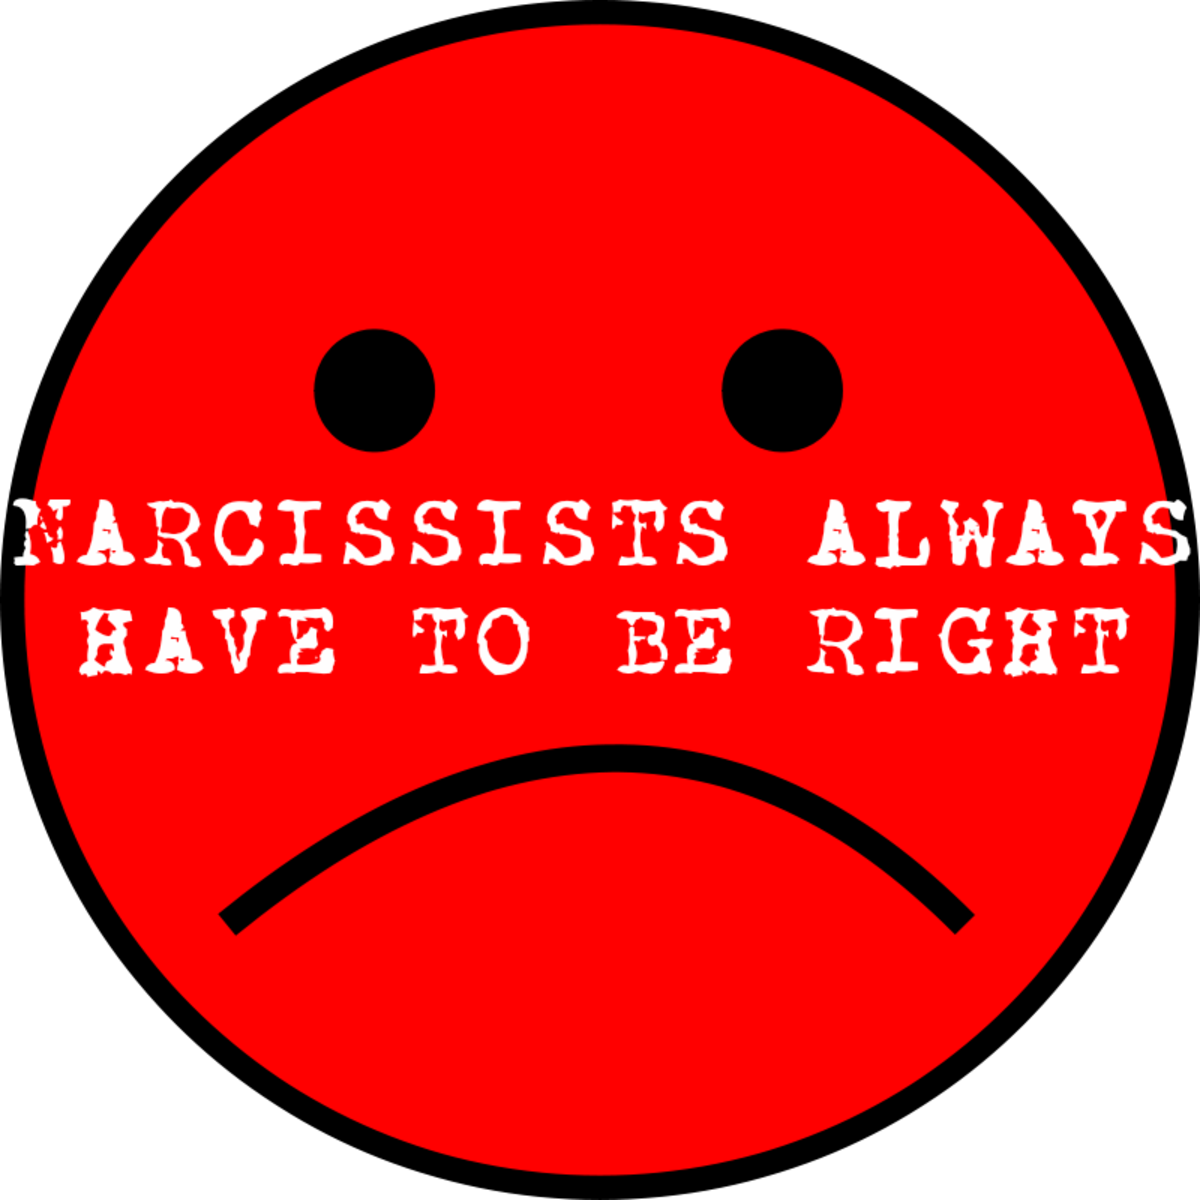 Why Do Narcissists Always Have to Be Right?